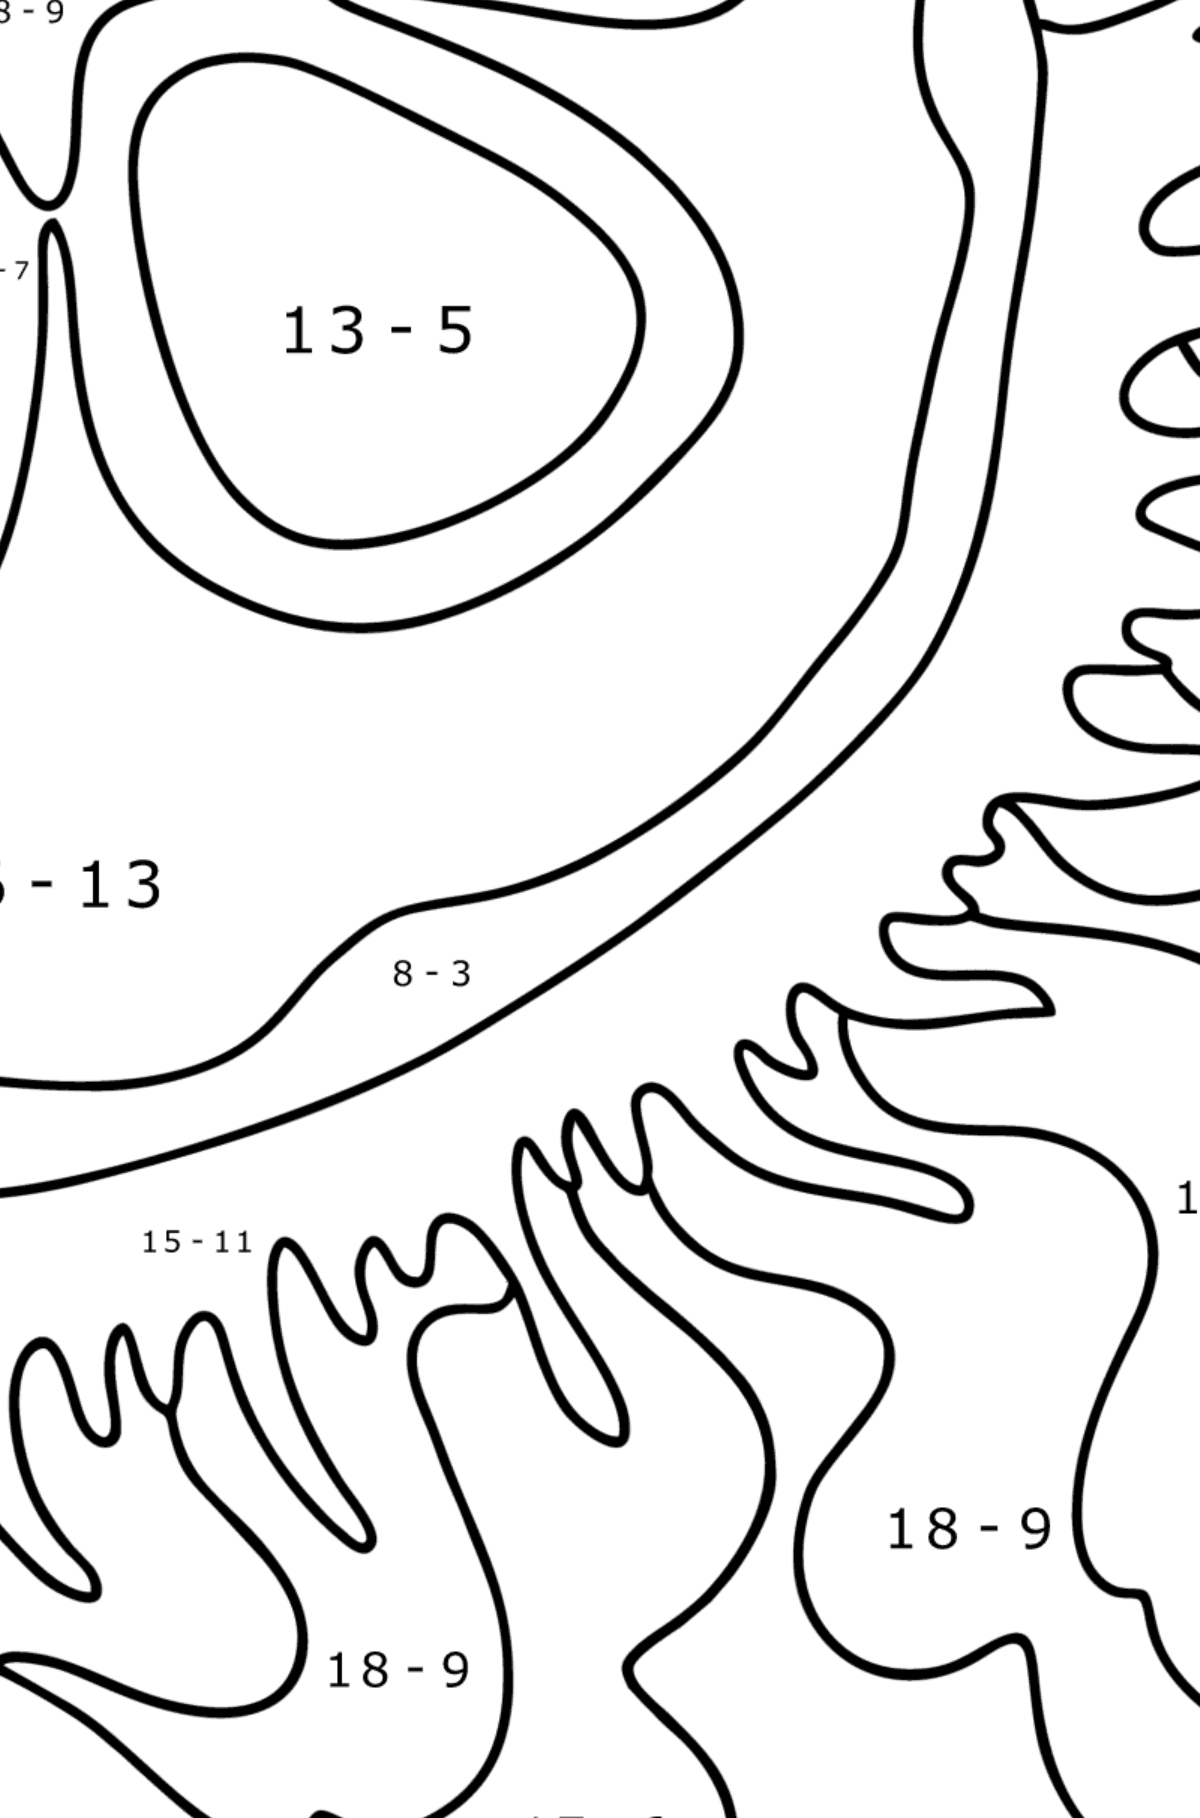 Moon jellyfish coloring page - Math Coloring - Subtraction for Kids